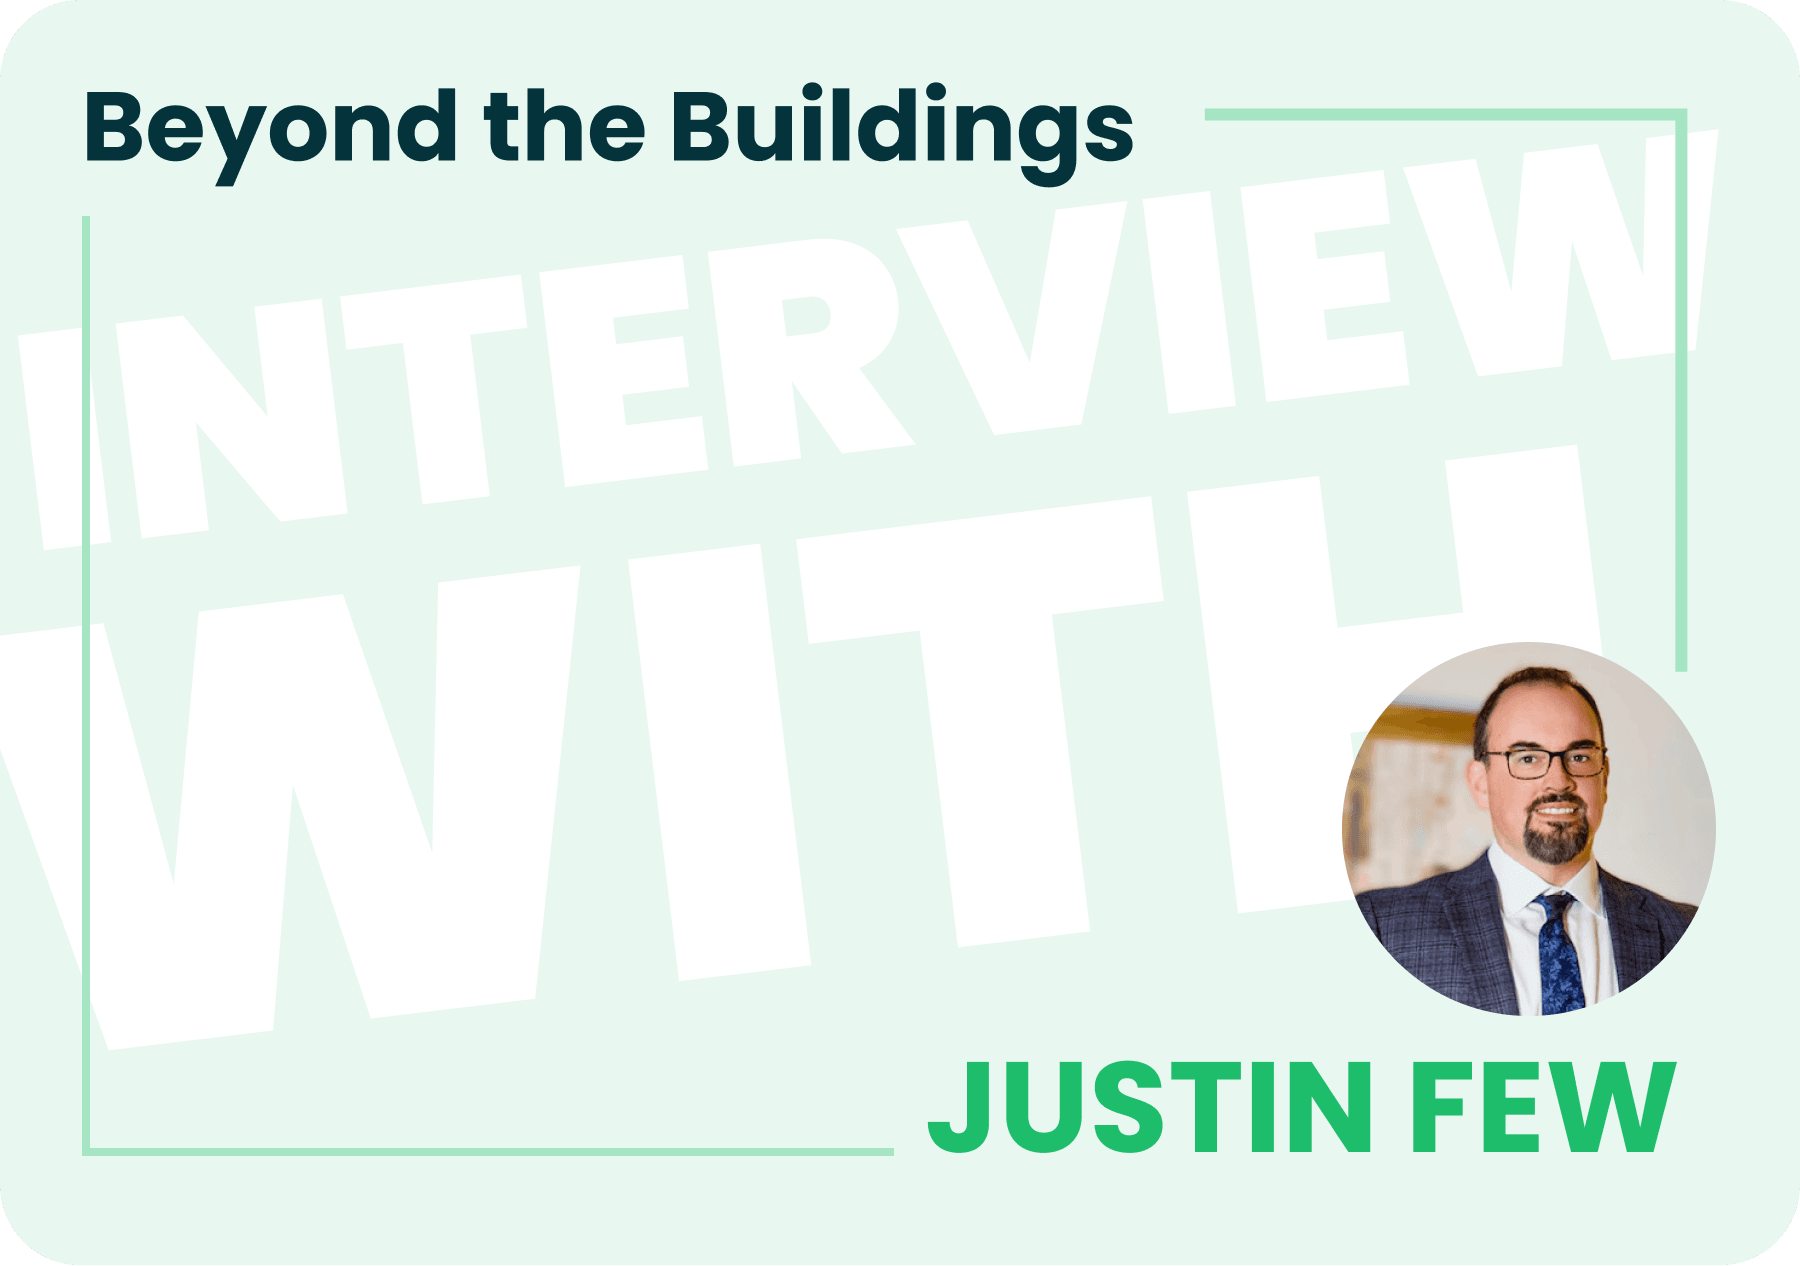 interview with Justin Few